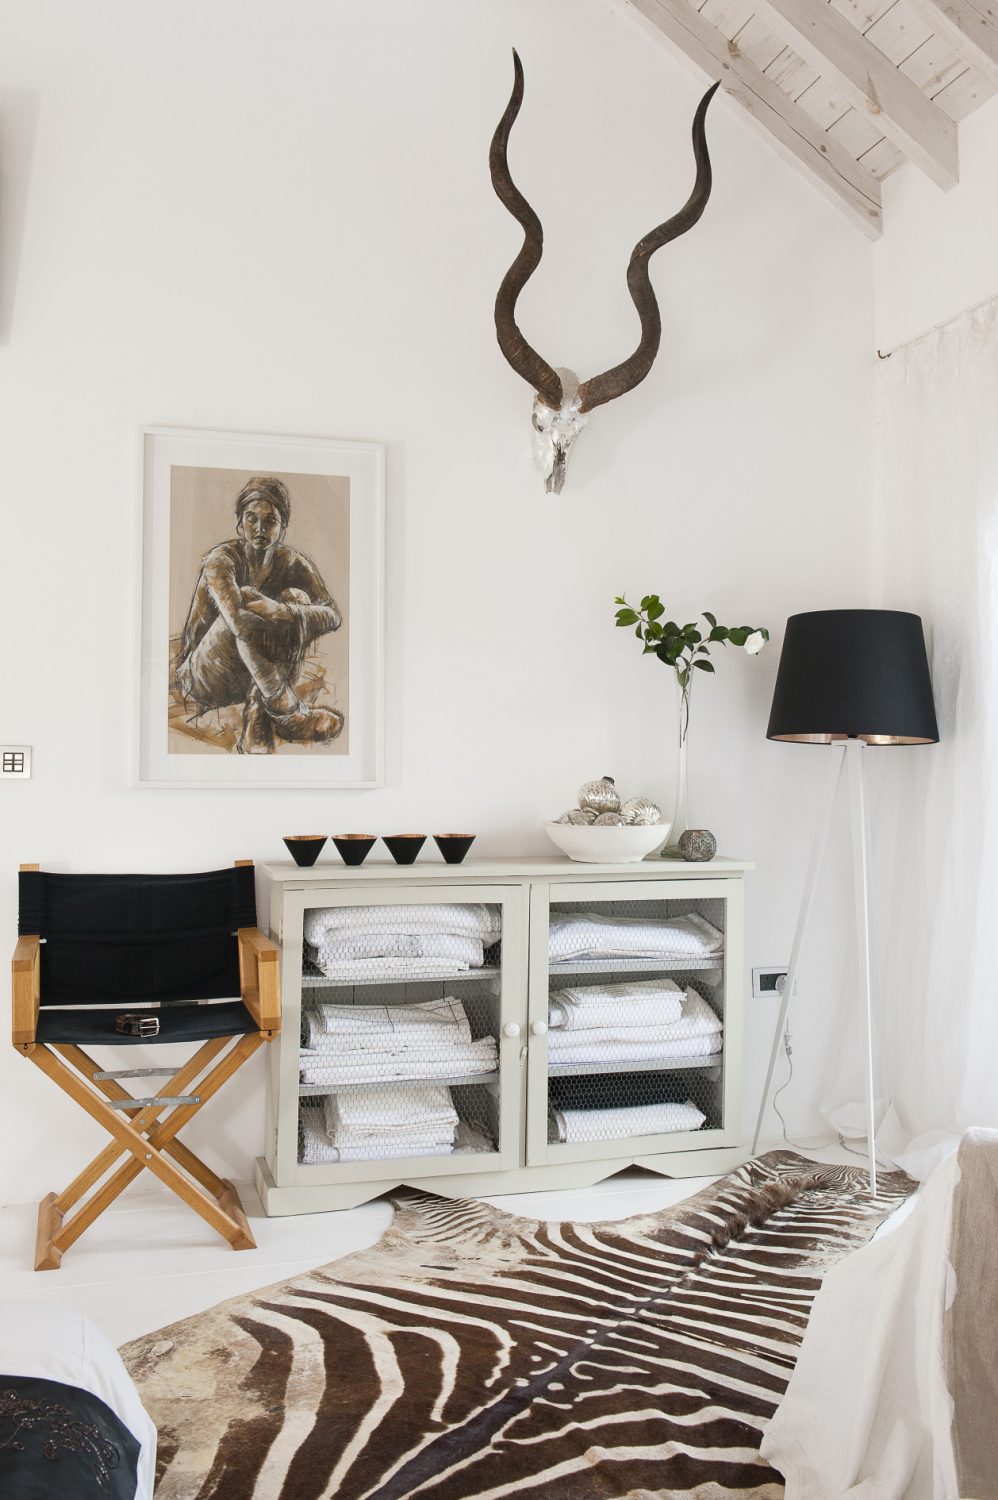 On the wall opposite the chic master bed is a magnificent pair of silver-leafed kudu horns and an oil and charcoal on paper by one of Sue’s favourite artists, and her teacher, East Sussex-based Nicola King